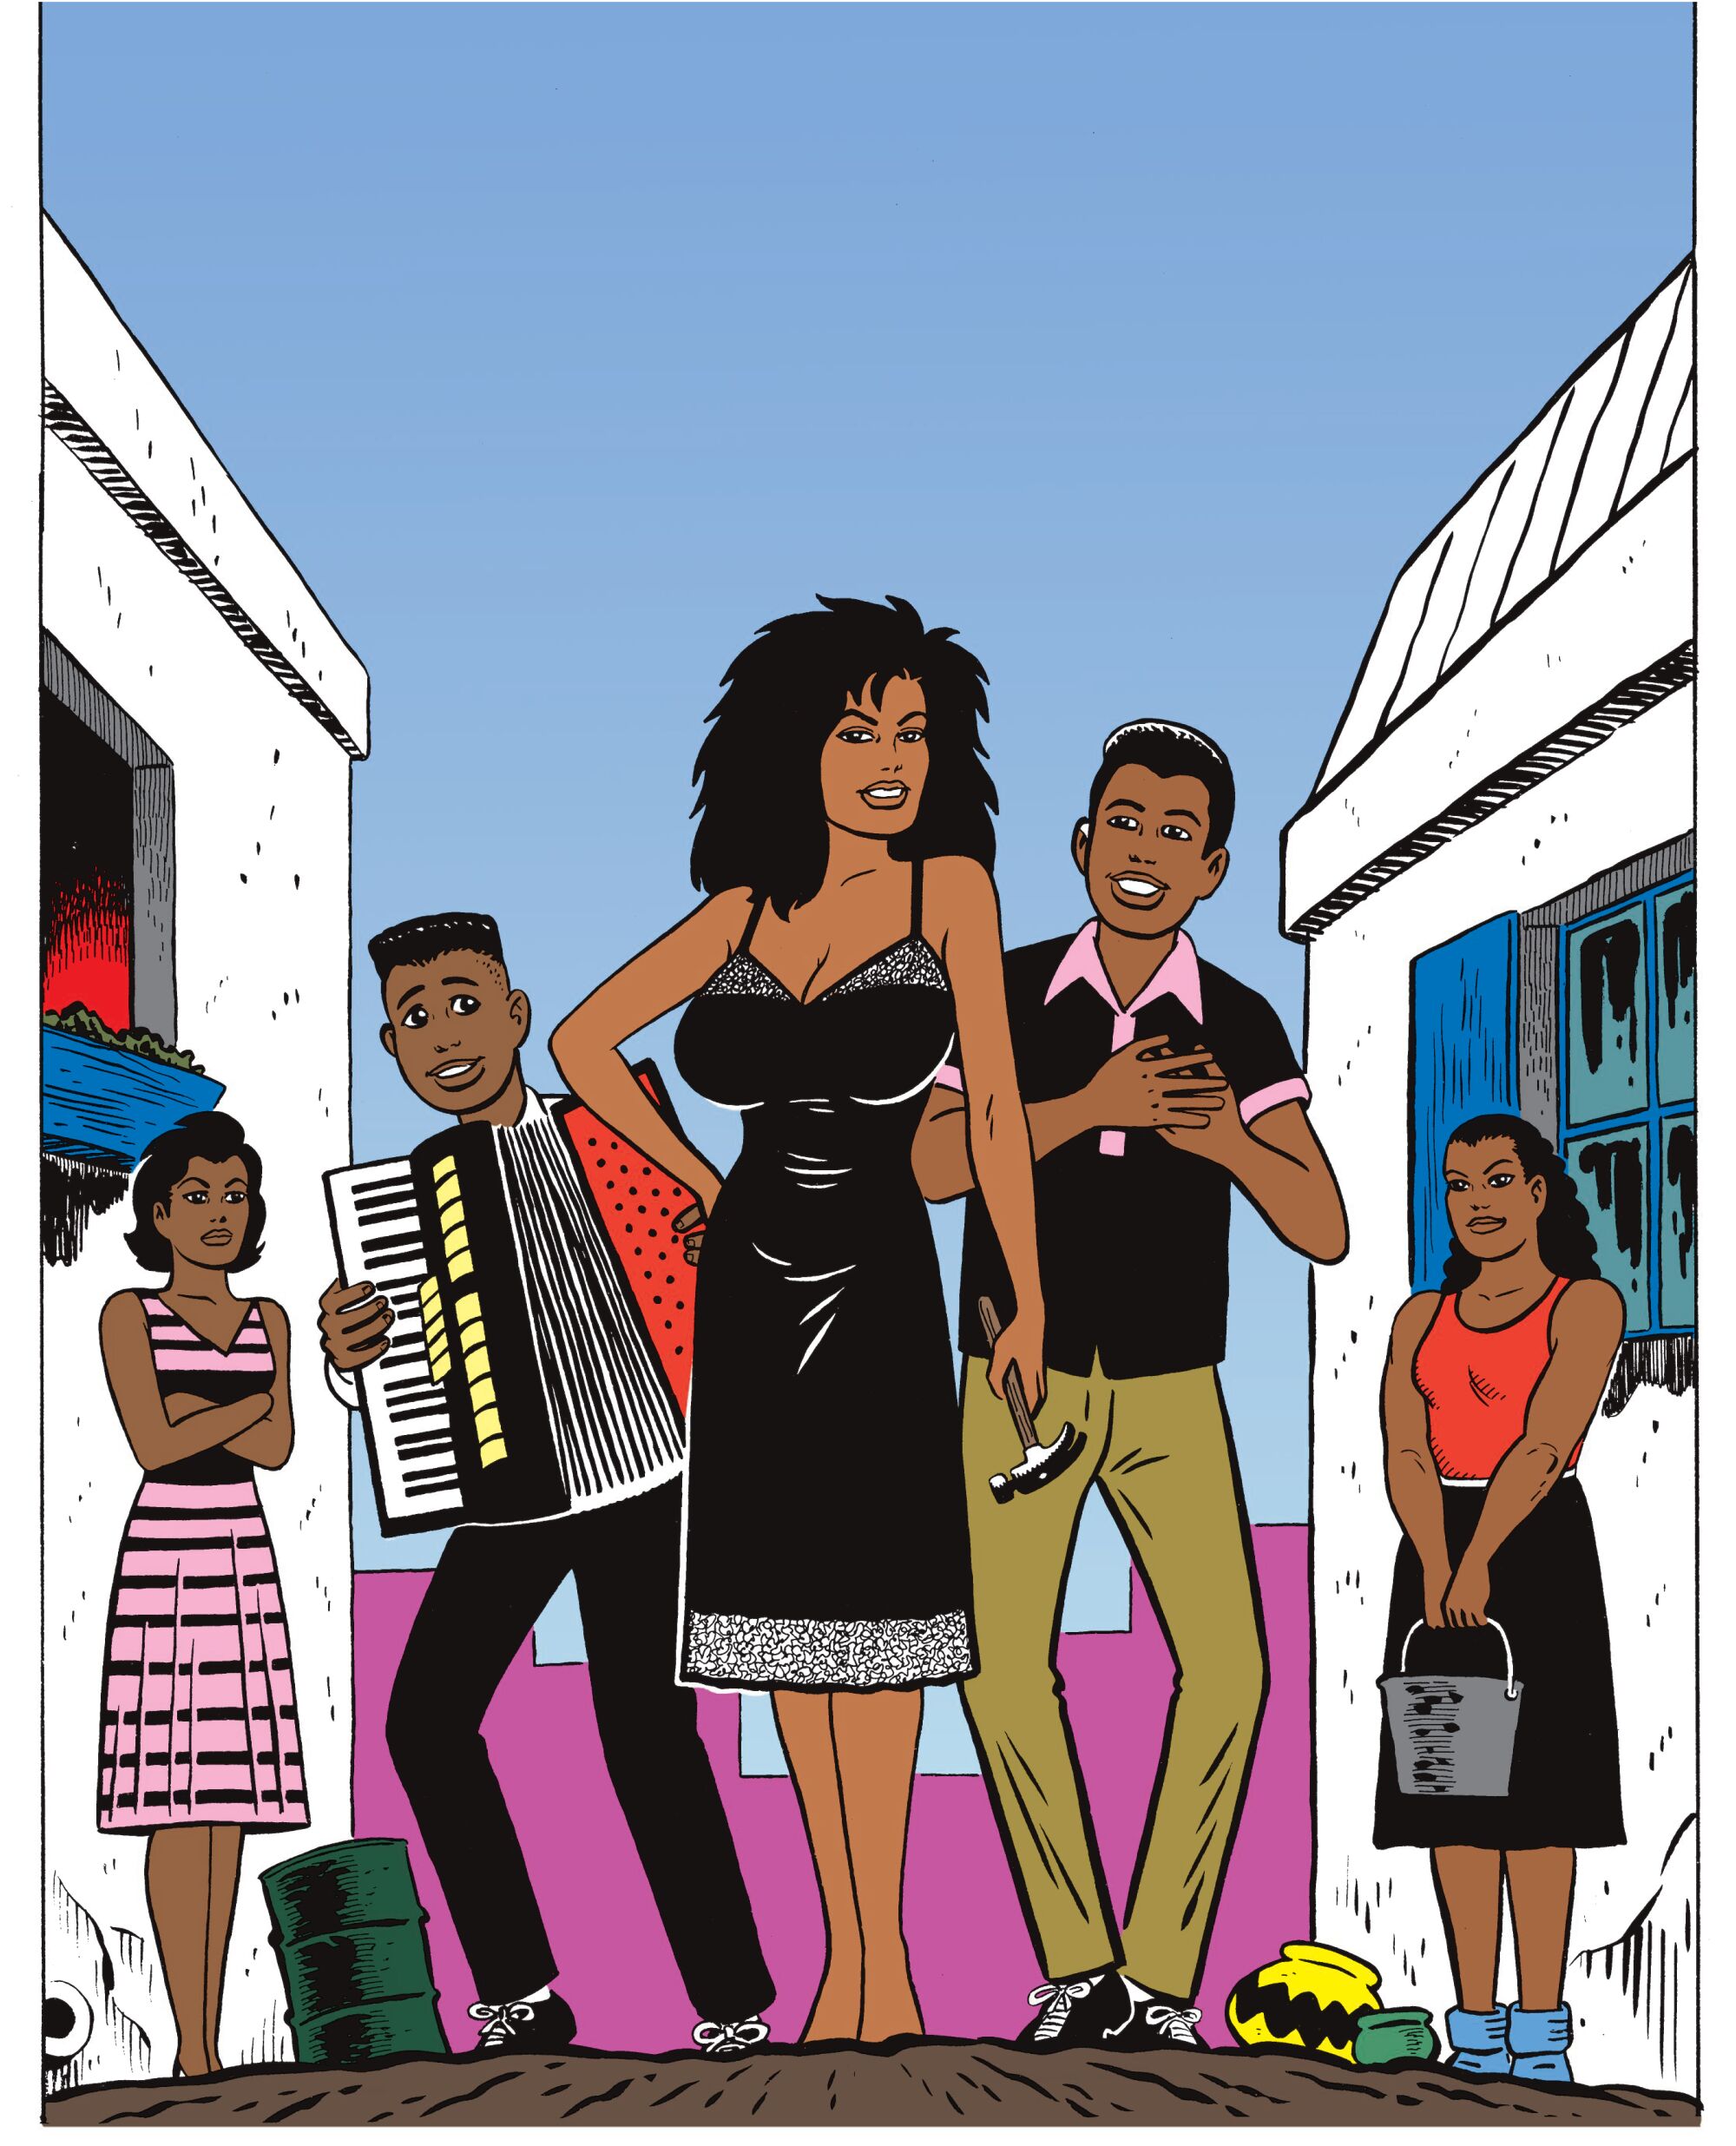 An illustration shows "Love & Rockets" heroine Luba in a black dress holding a hammer and framed by other characters